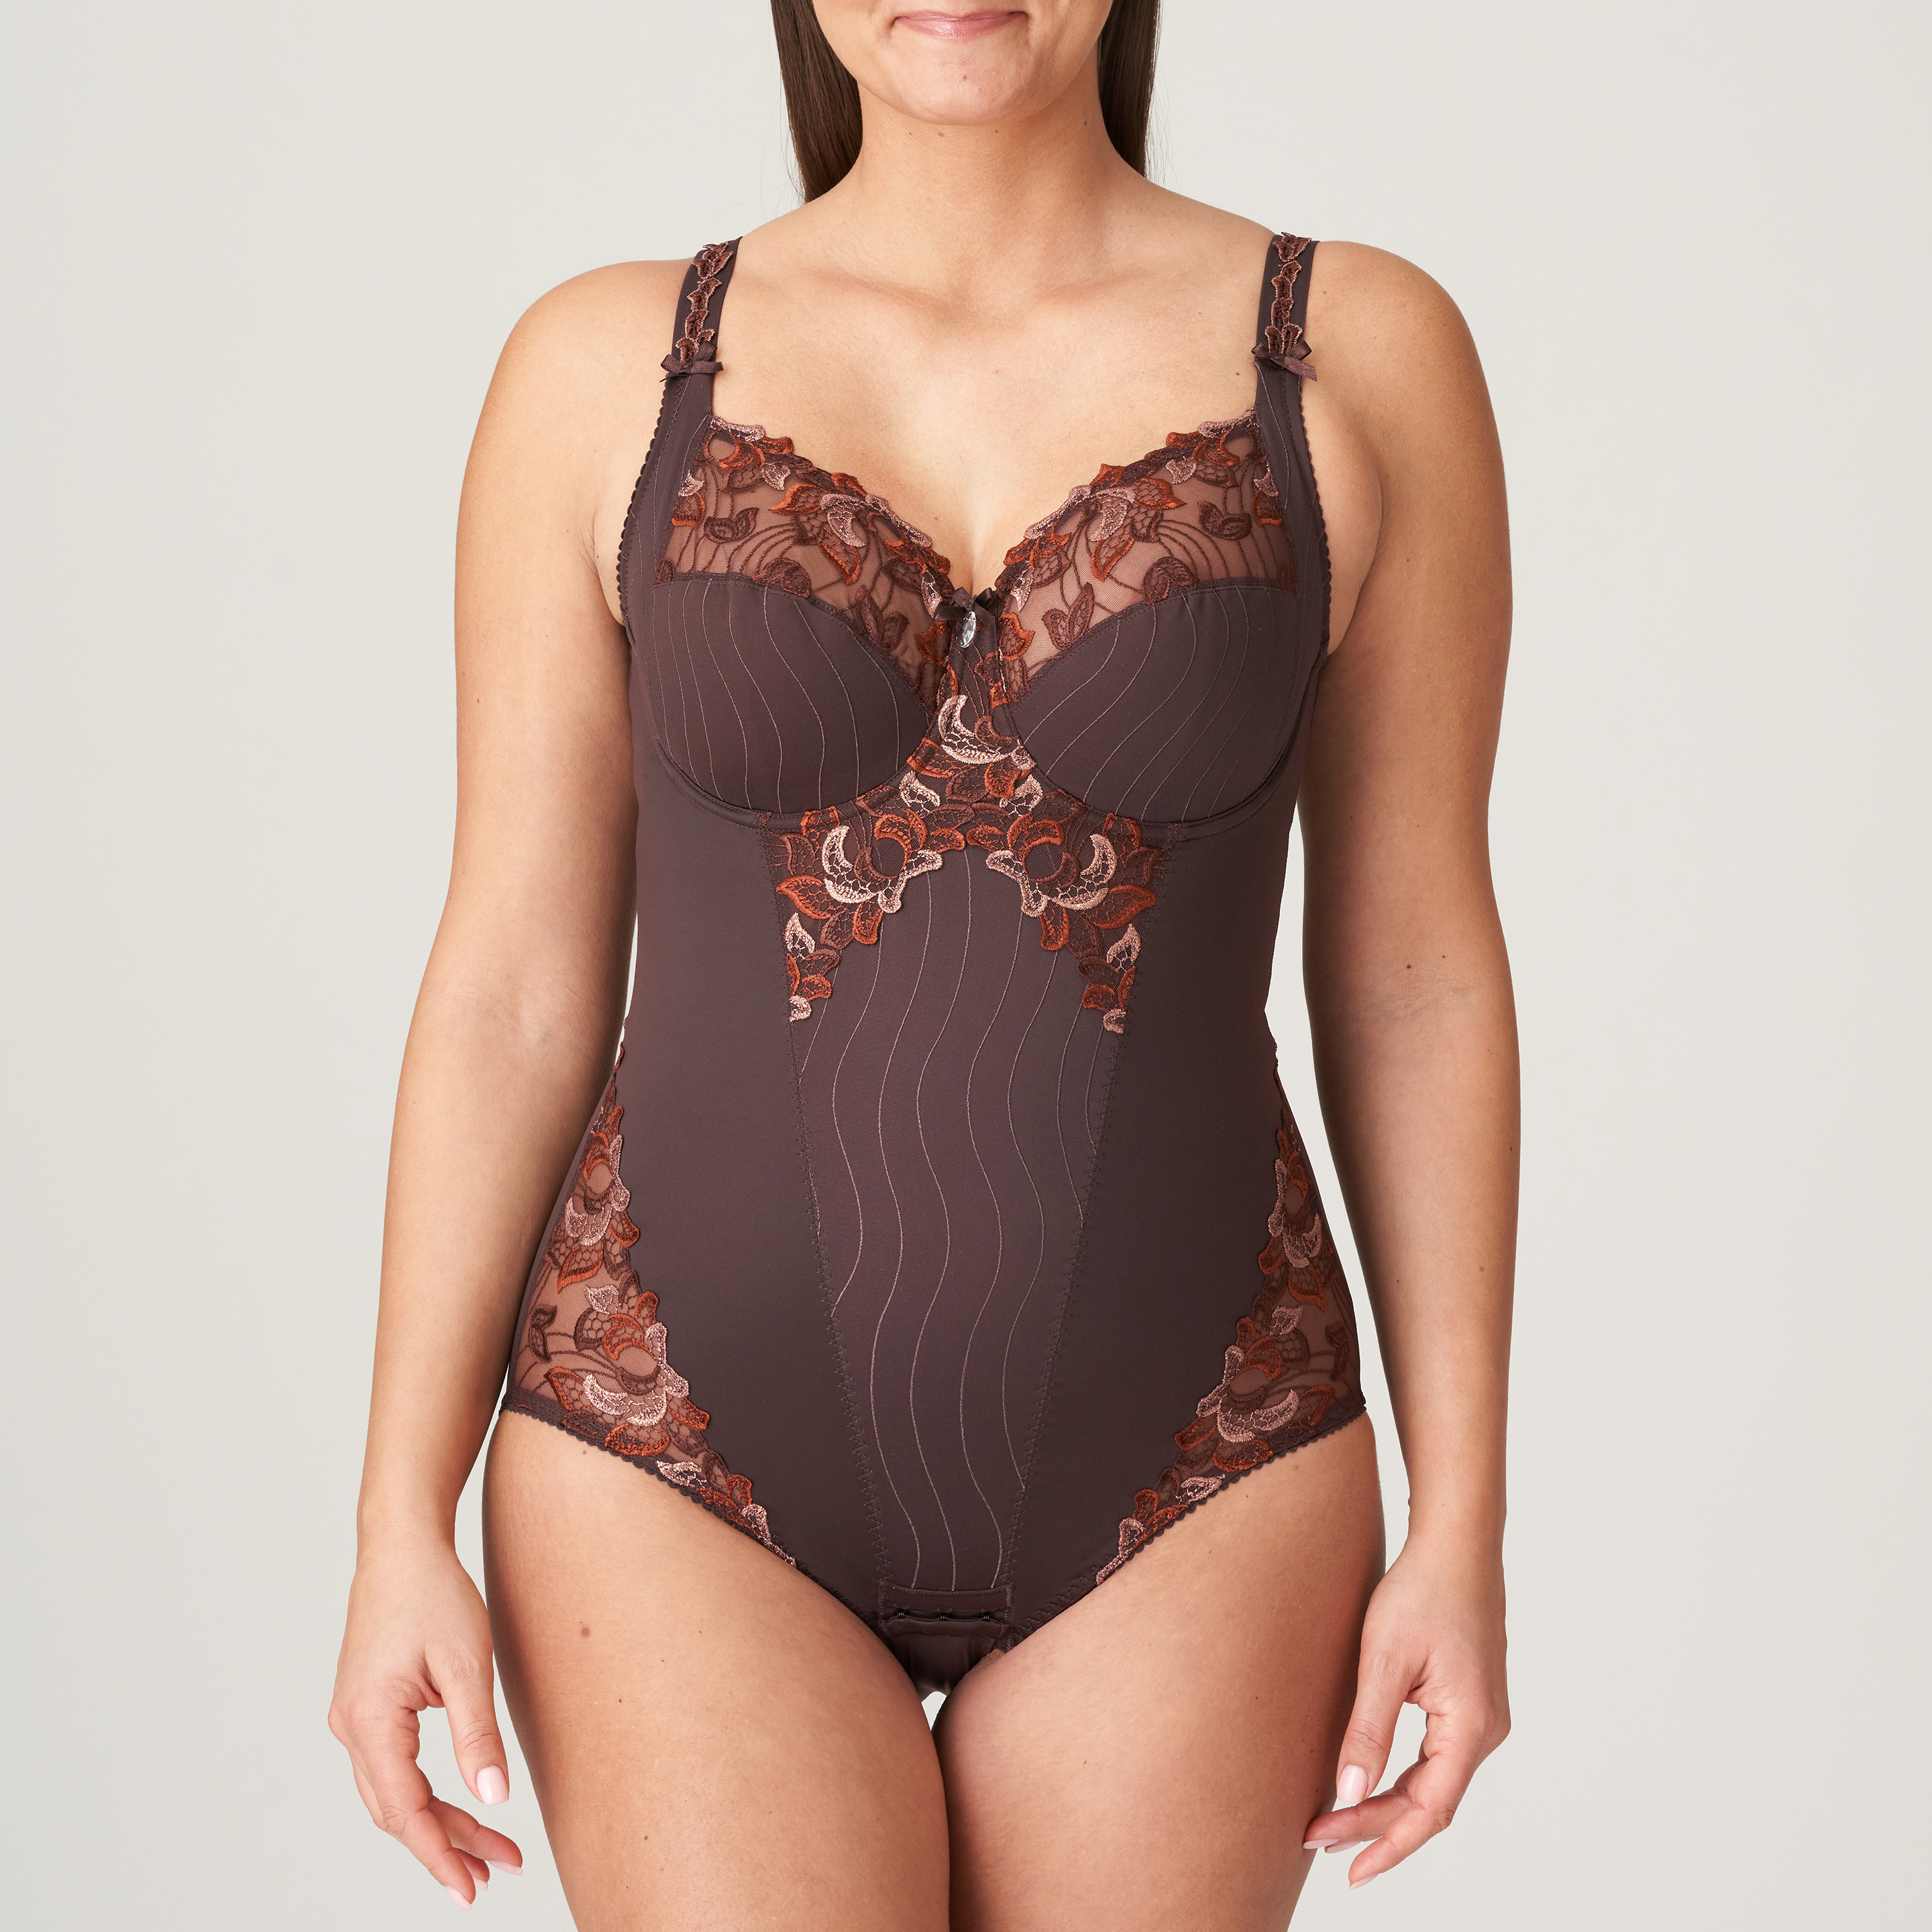 PrimaDonna DEAUVILLE natural full cup body